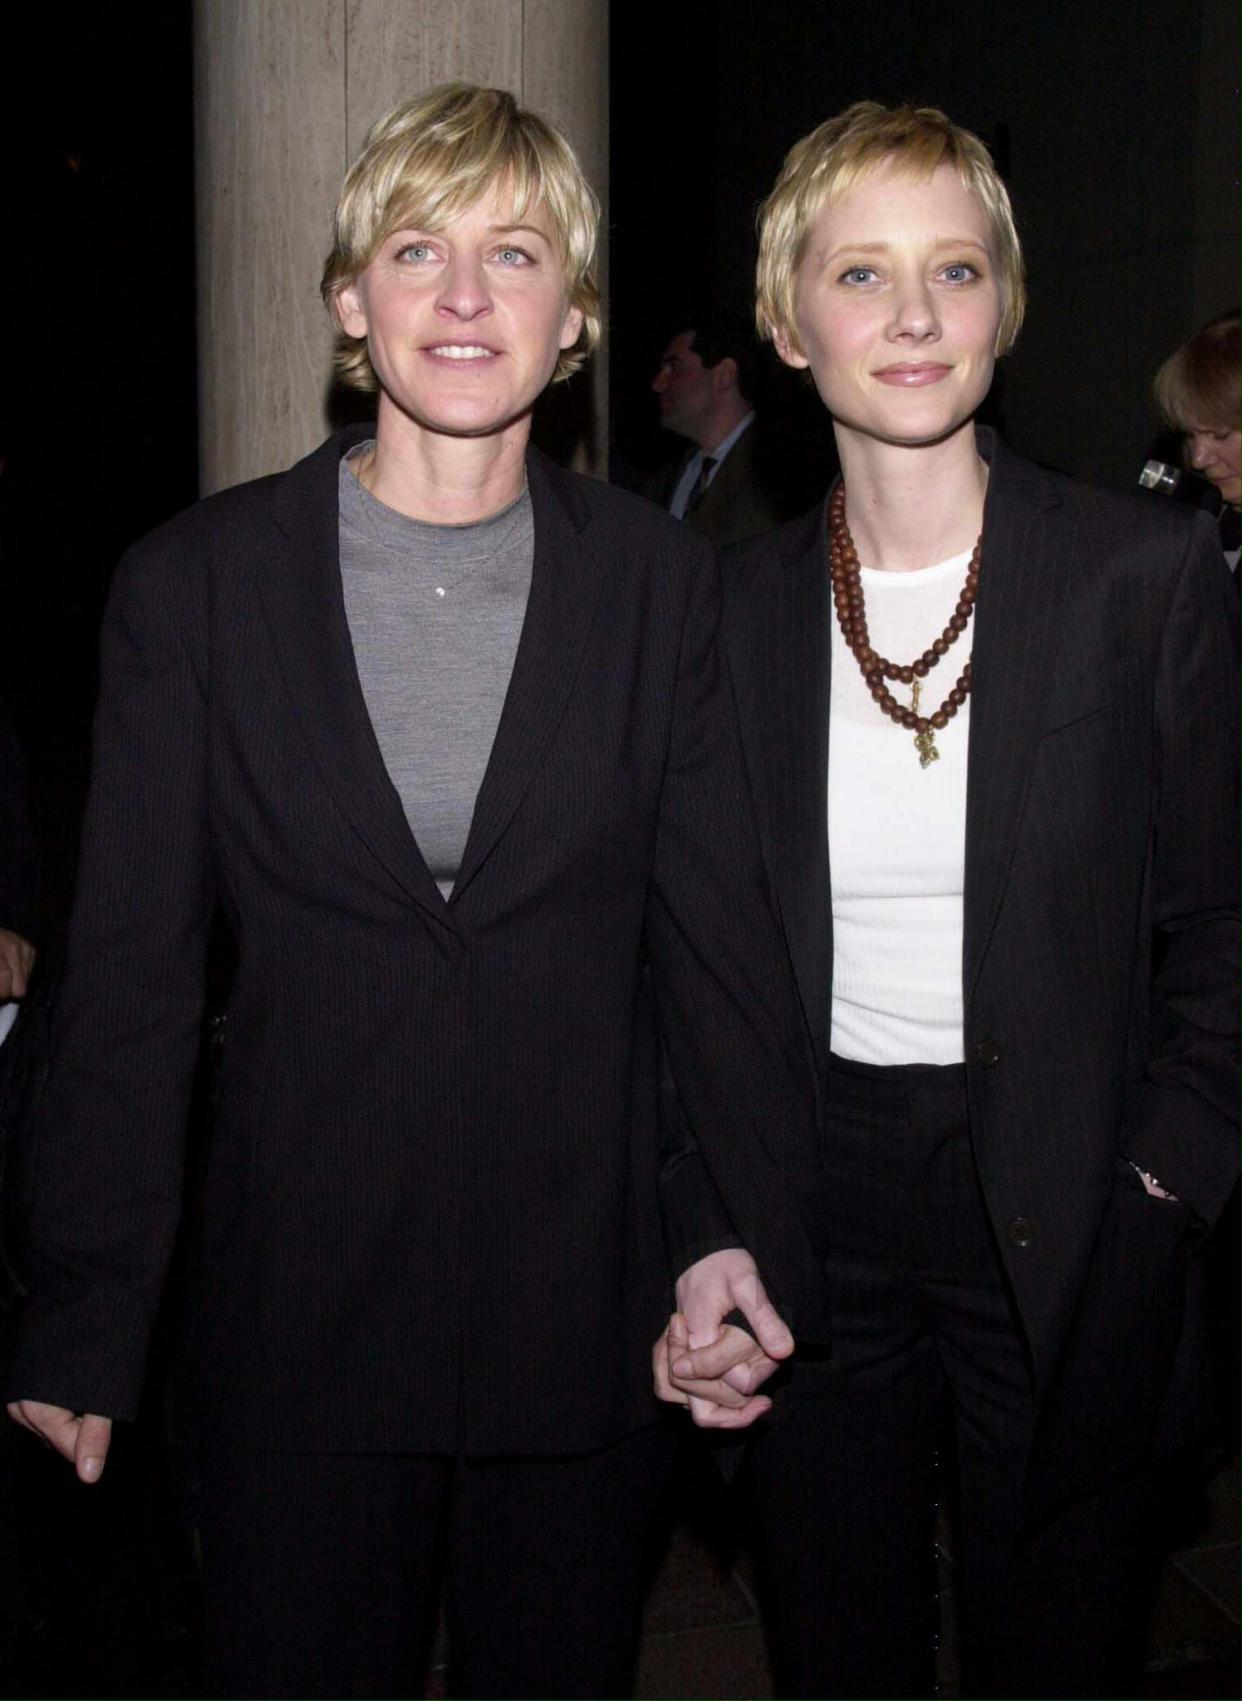 Ellen DeGeneres and Anne Heche were a couple from 1997 to 2000.